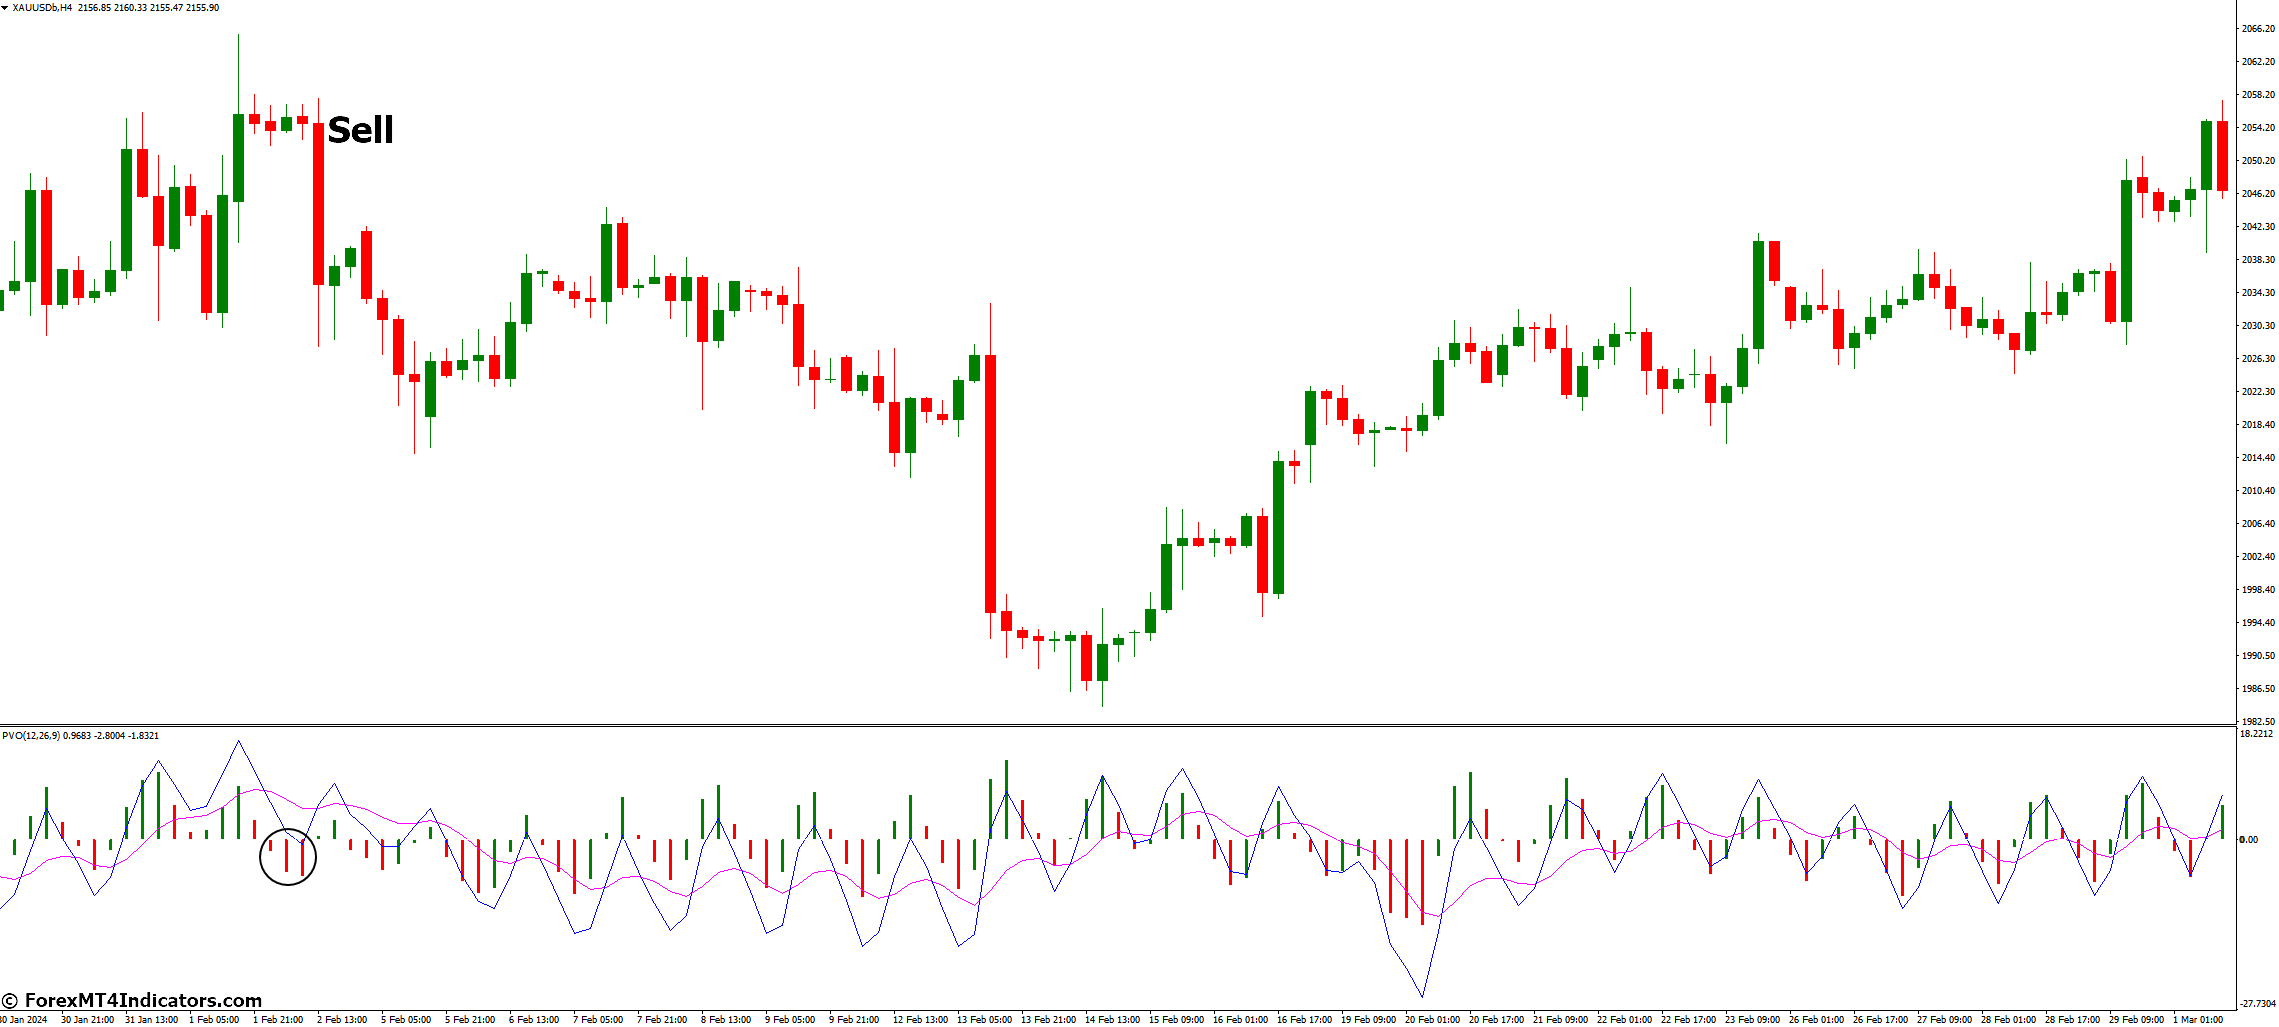 How to Trade with Percentage Volume Oscillator Indicator - Sell Entry